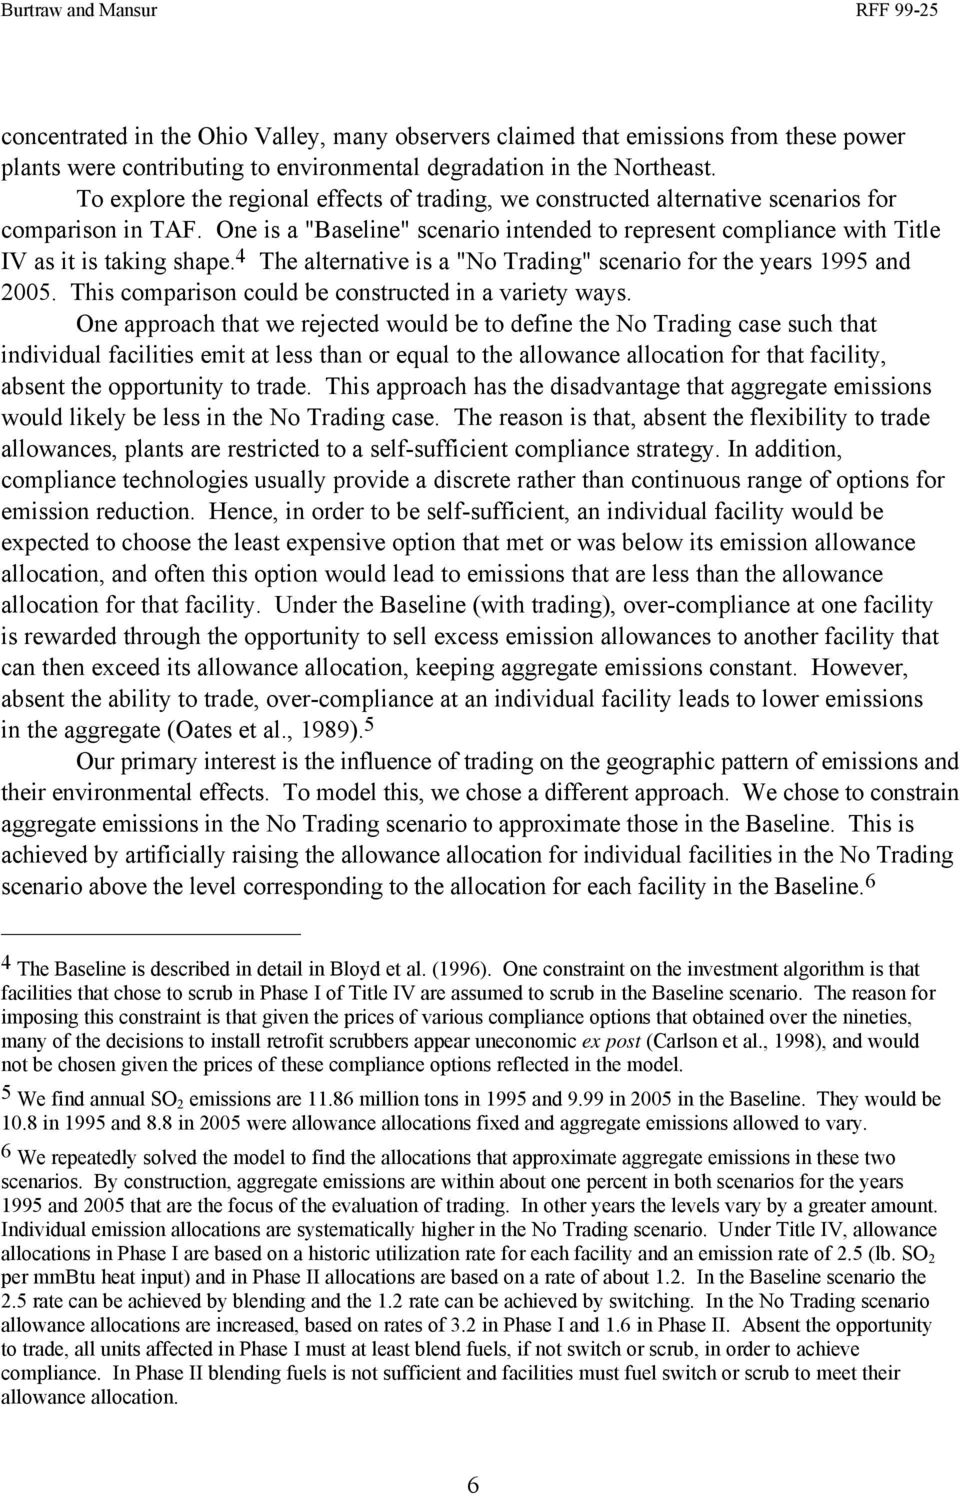 One is a "Baseline" scenario intended to represent compliance with Title IV as it is taking shape. 4 The alternative is a "No Trading" scenario for the years 1995 and 2005.